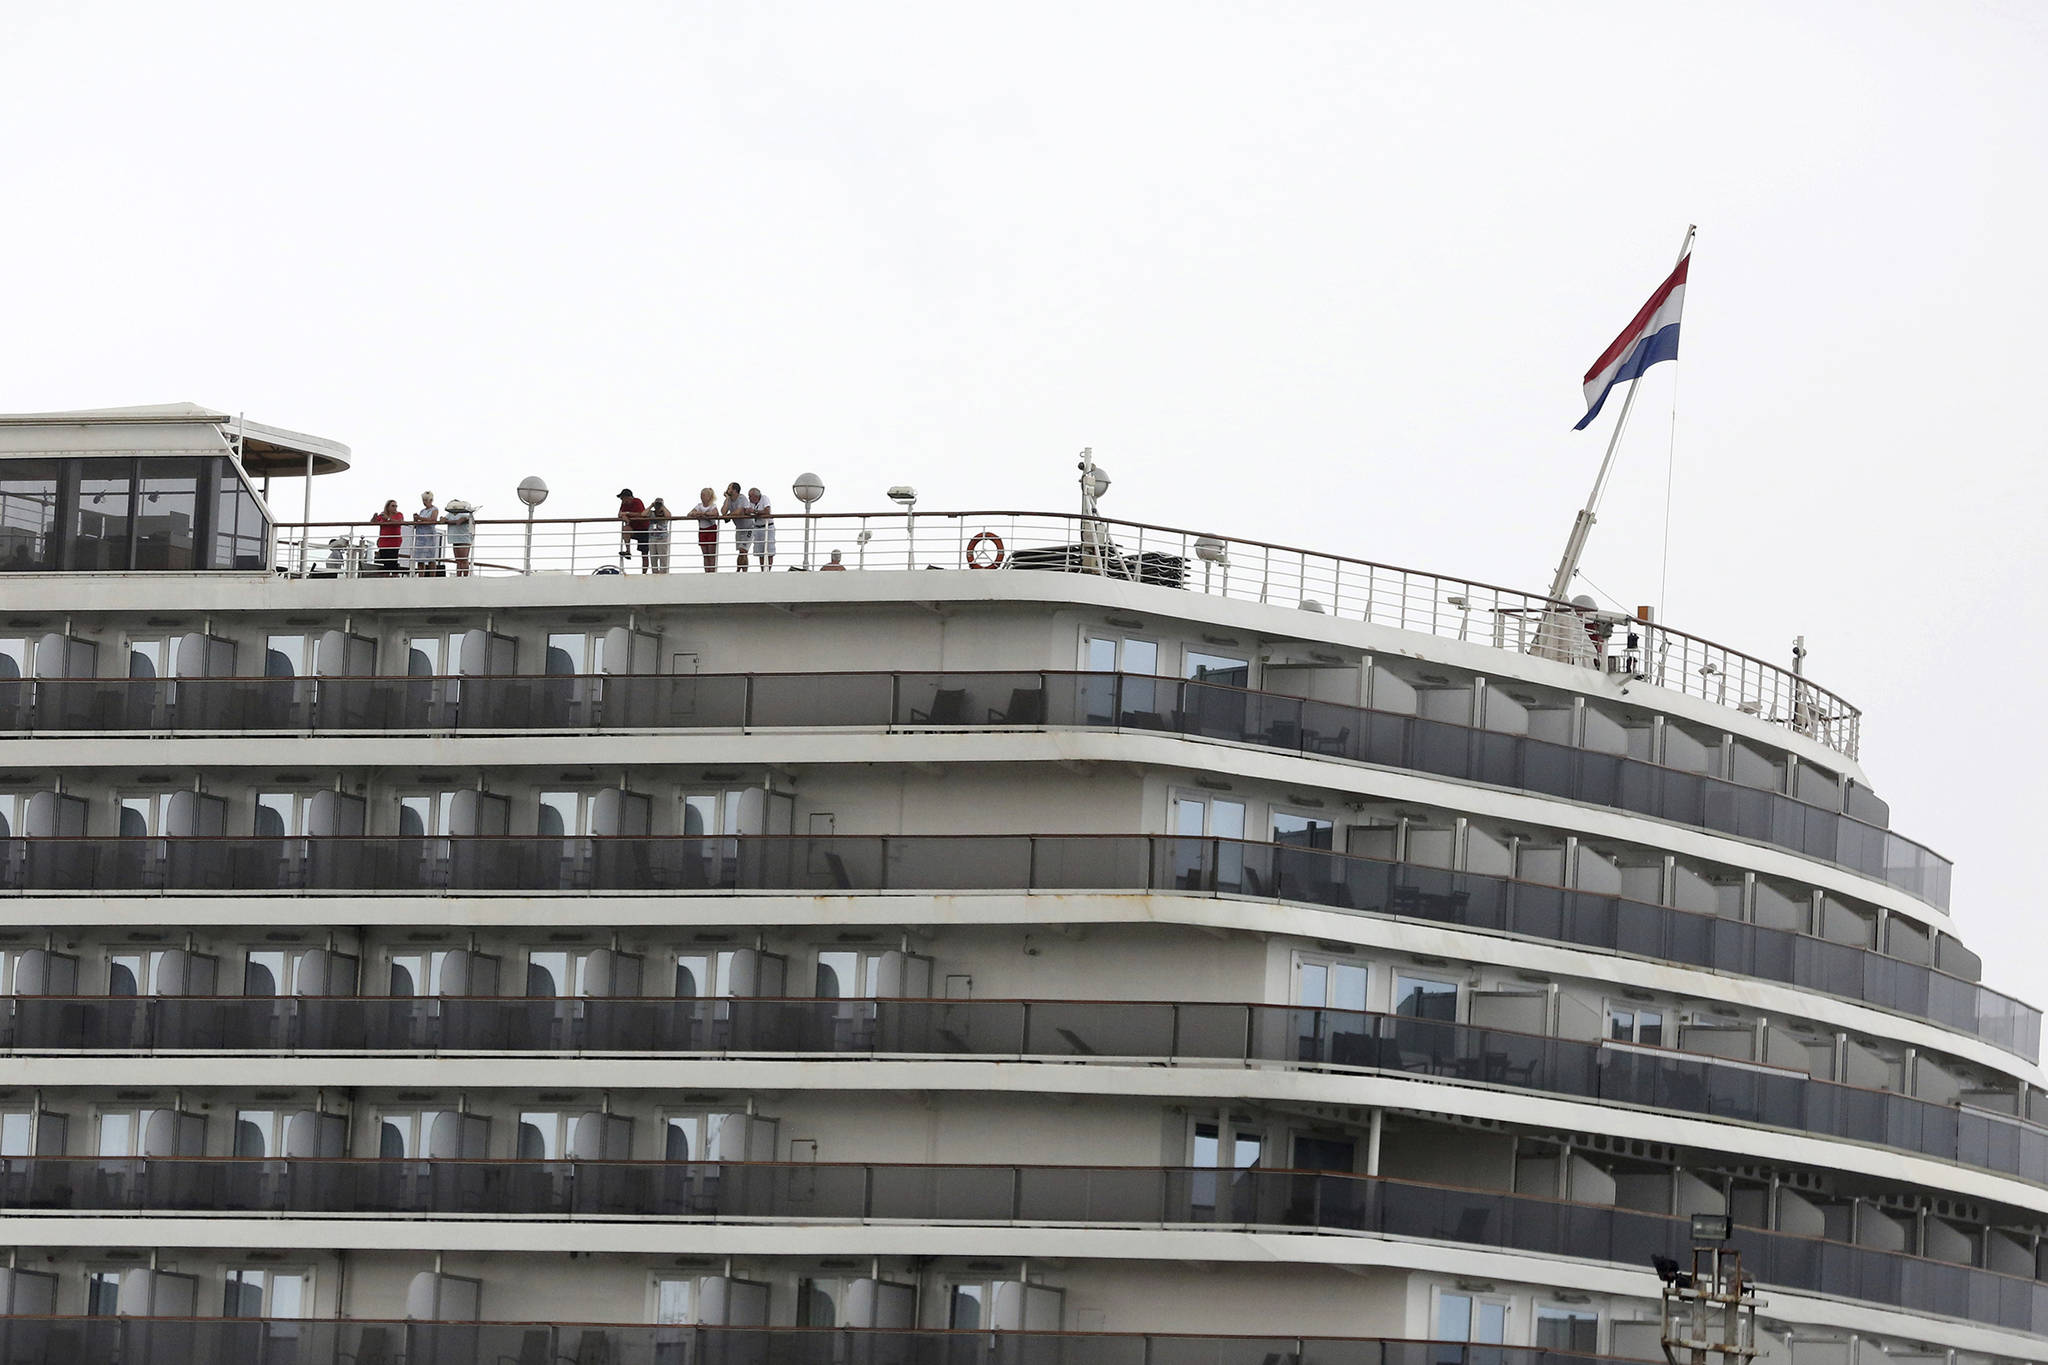 Passengers stand on the top deck of the MS Westerdam while the cruise ship is docked in Sihanoukville, Cambodia Monday, Feb. 17, 2020. The feel-good story of how Cambodia allowed a cruise ship to dock after it was turned away elsewhere in Asia for fear of spreading the deadly virus that began in China has taken a dark turn after a passenger released from the ship tested positive for the virus. (AP Photo)